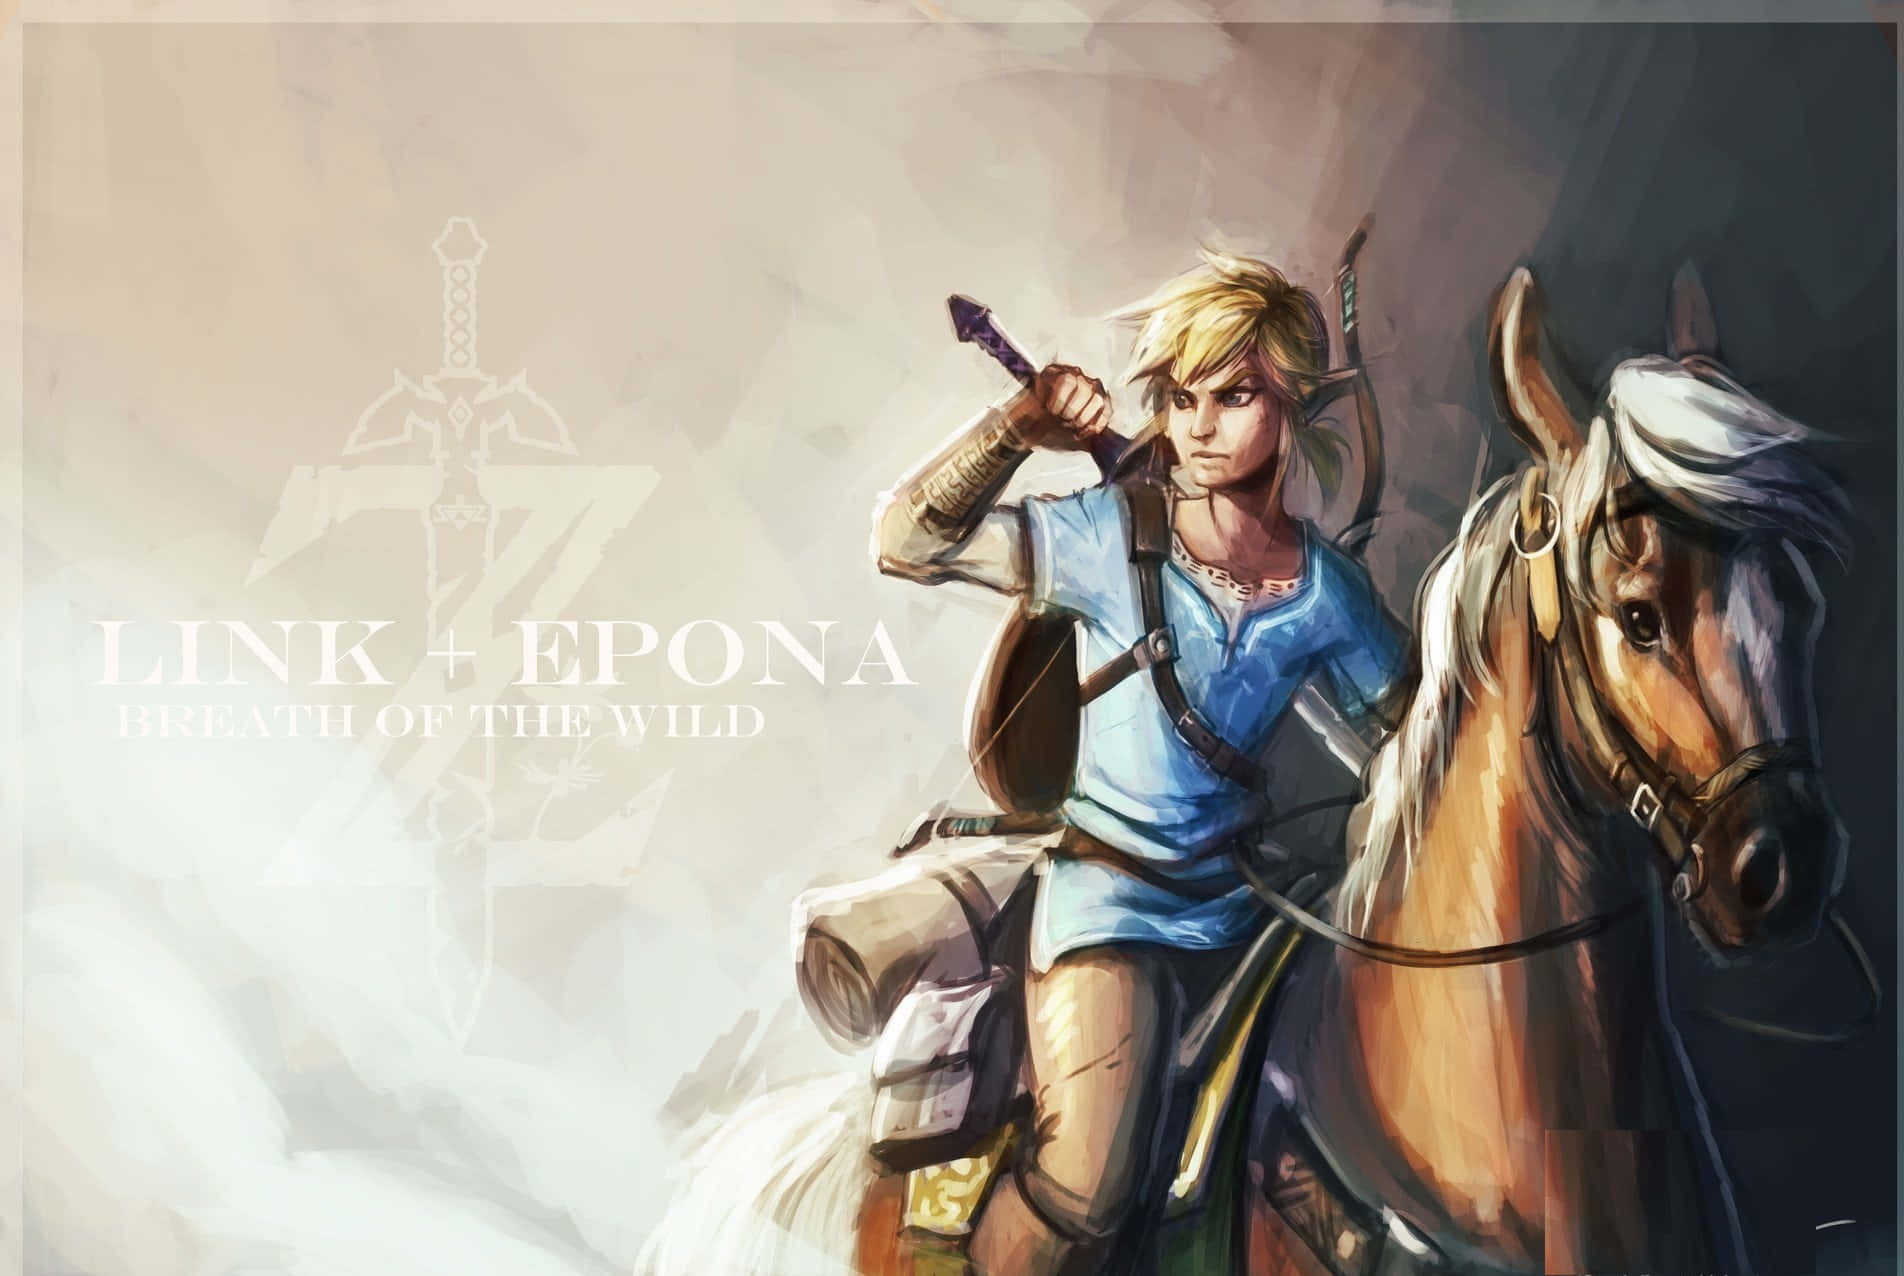 "Link riding Epona through a field in The Legend of Zelda" Wallpaper